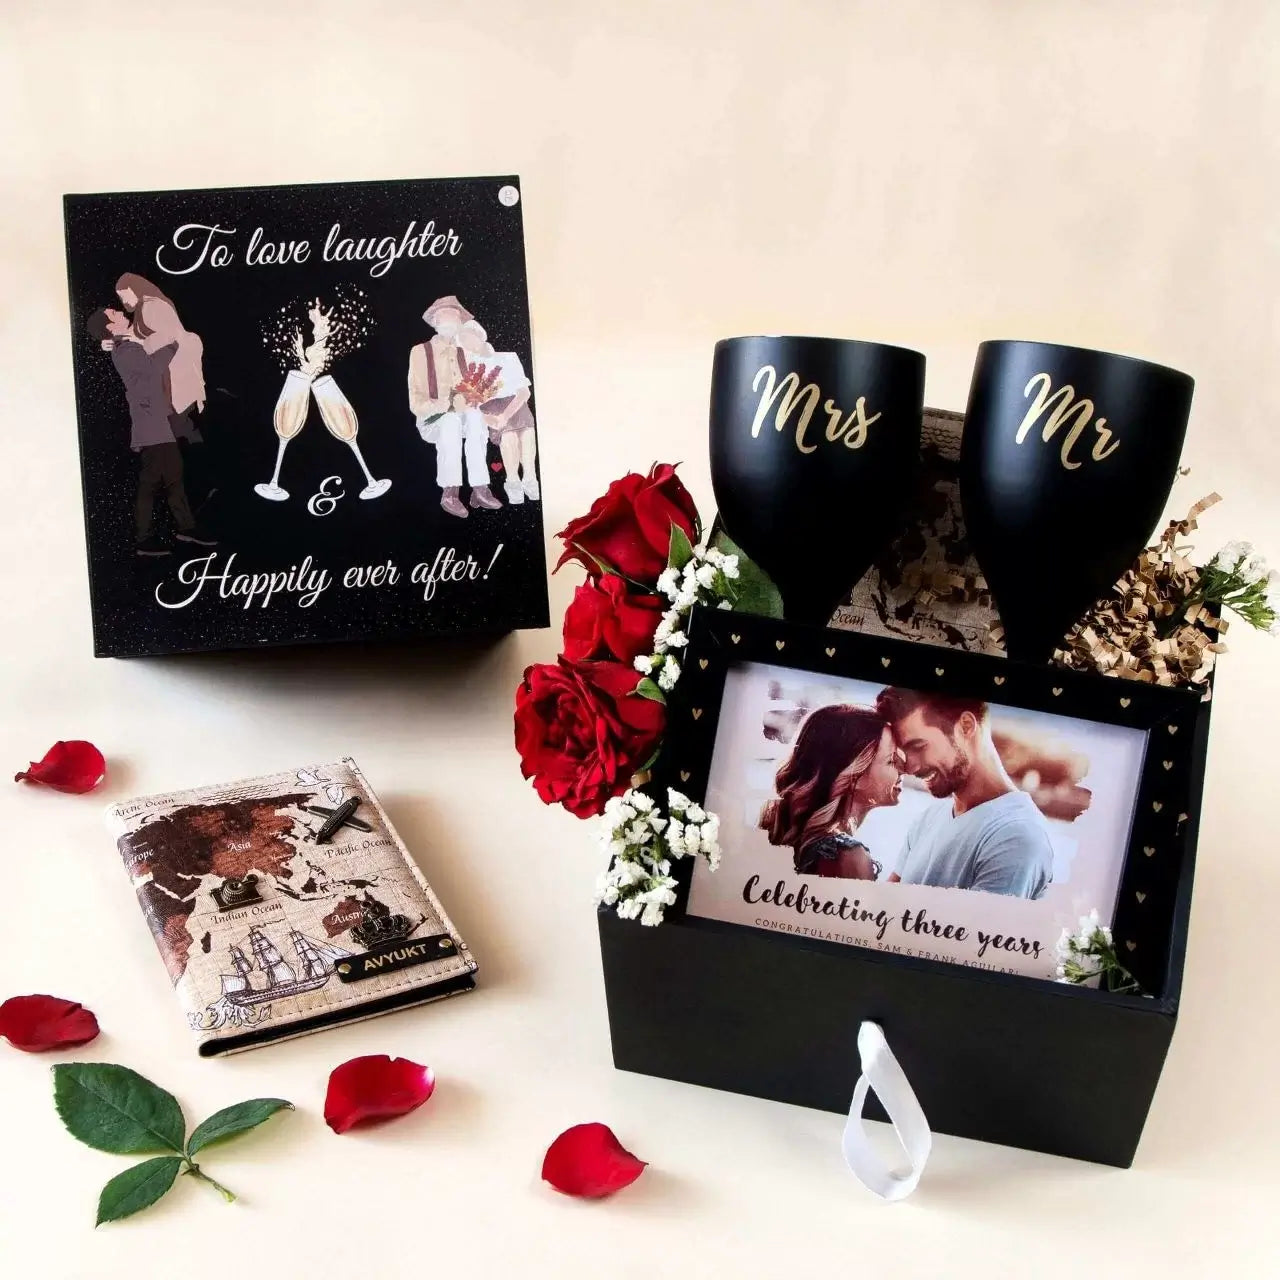 Bisht Enterprises - 6in1 Gift Sets Get Personalized Corporate Gifts, Best  Price In India. Personalized Gift Items for your Employees, Staff, Clients,  and Partners at the best & affordable prices at Bisht